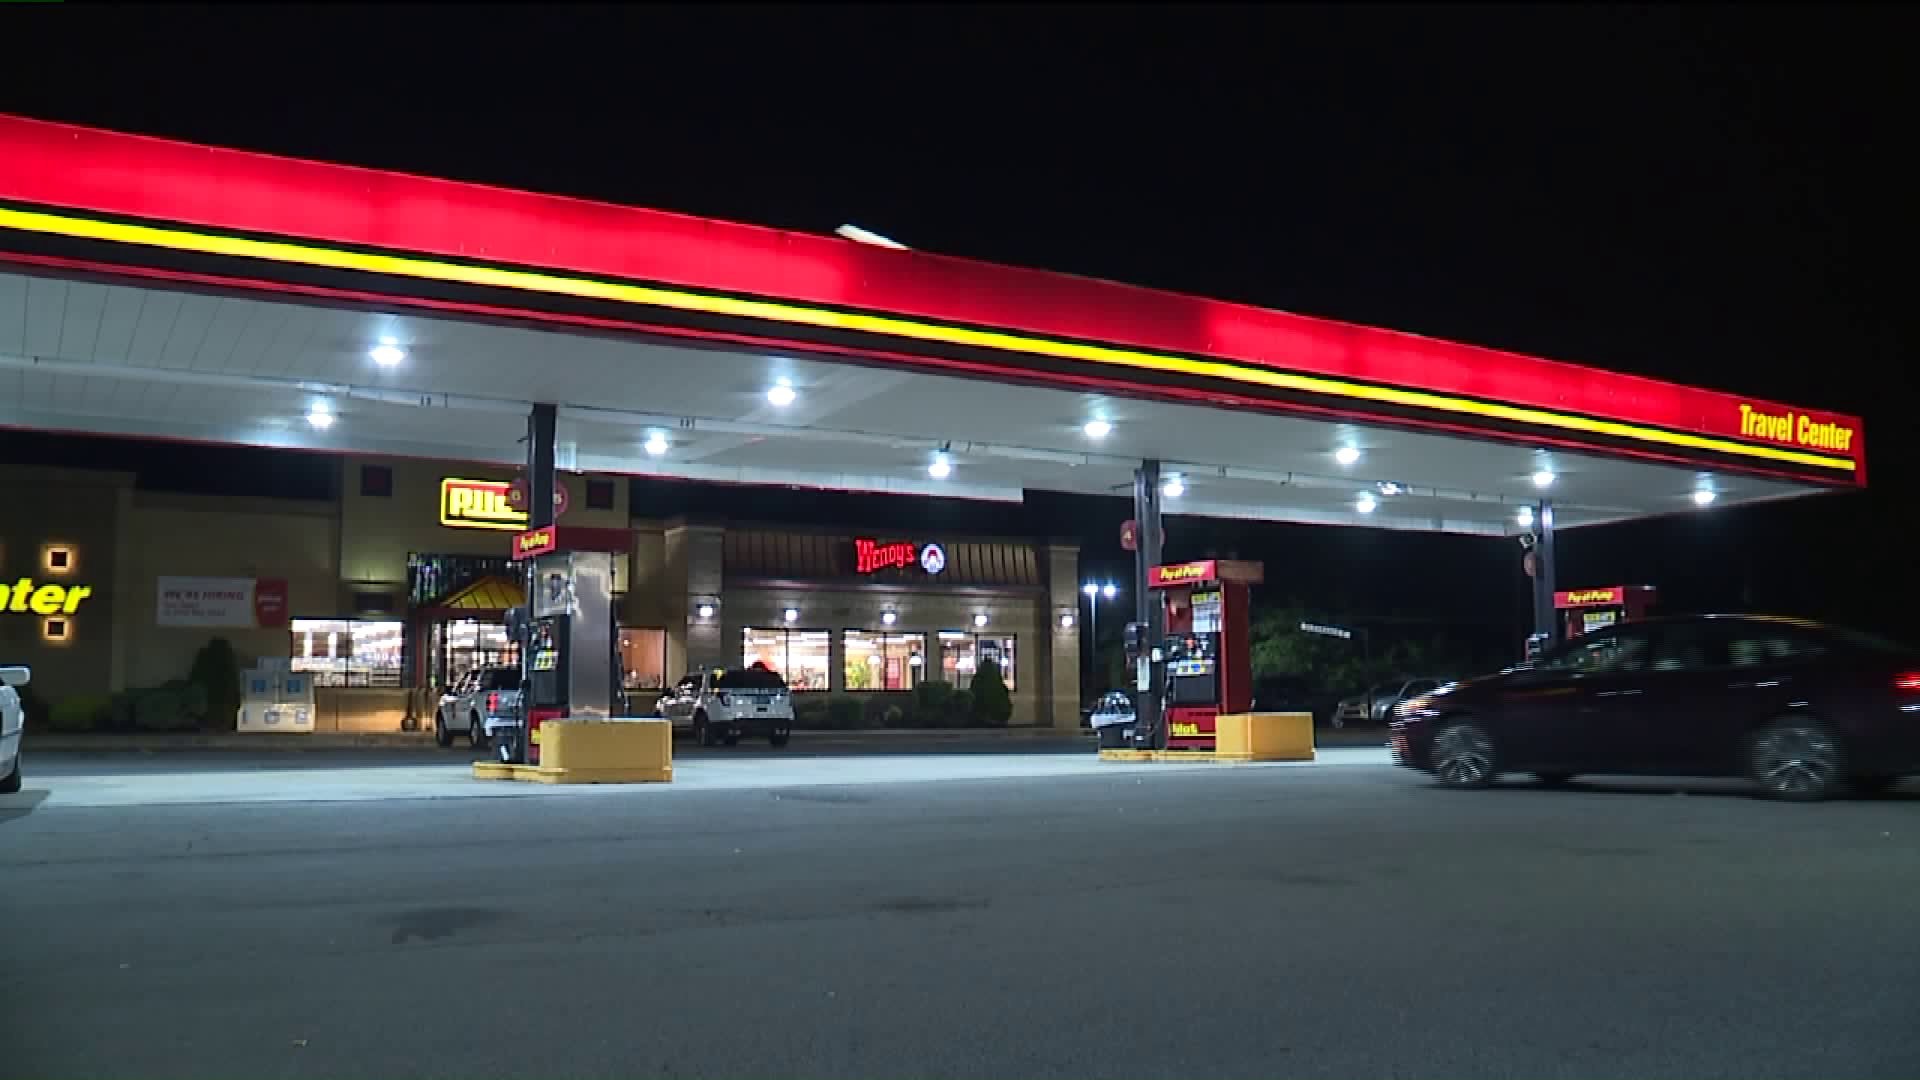 Armed Robbery at Truck Stop in Luzerne County